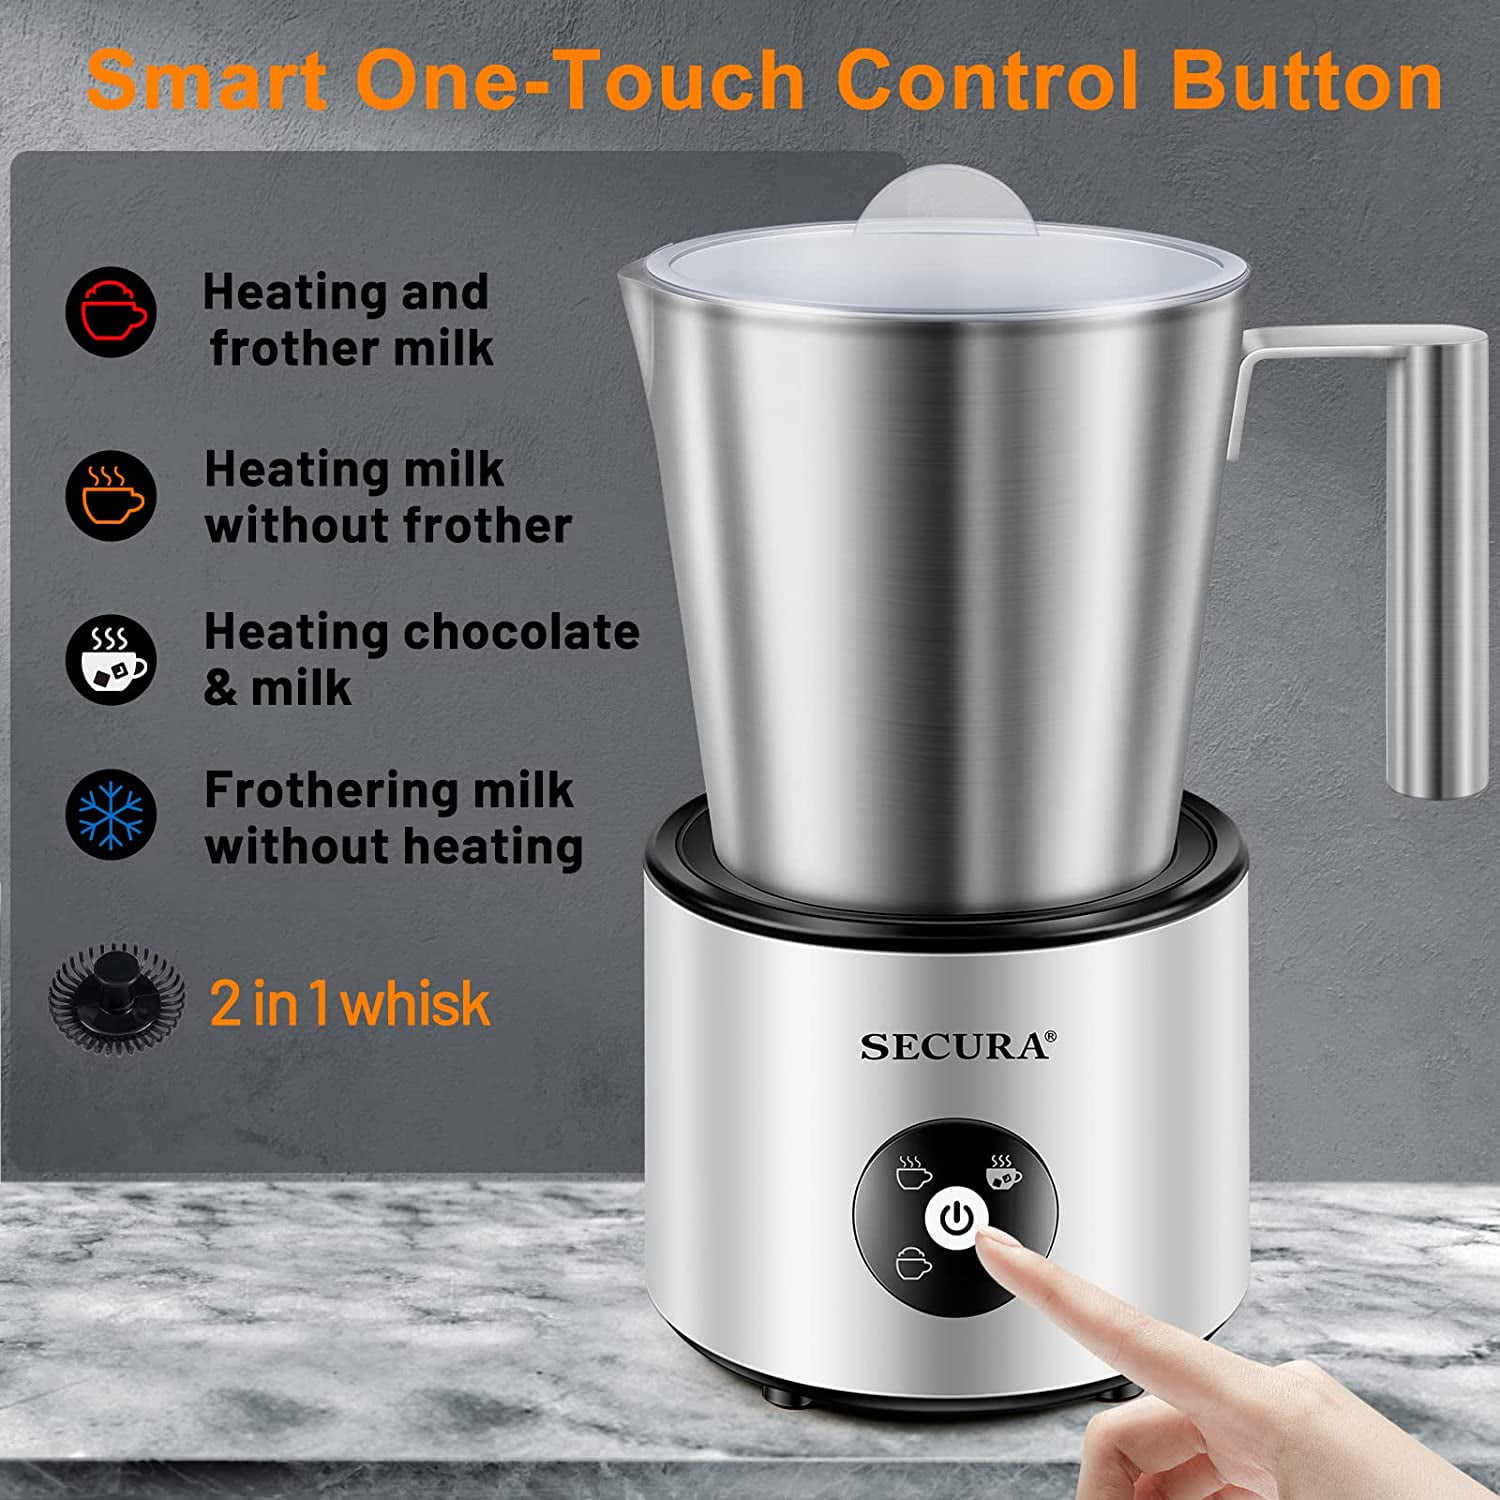 .ca] Secura Automatic Electric Milk Frother and Warmer 250ml with  FREE cleaning brush $49.99 - RedFlagDeals.com Forums